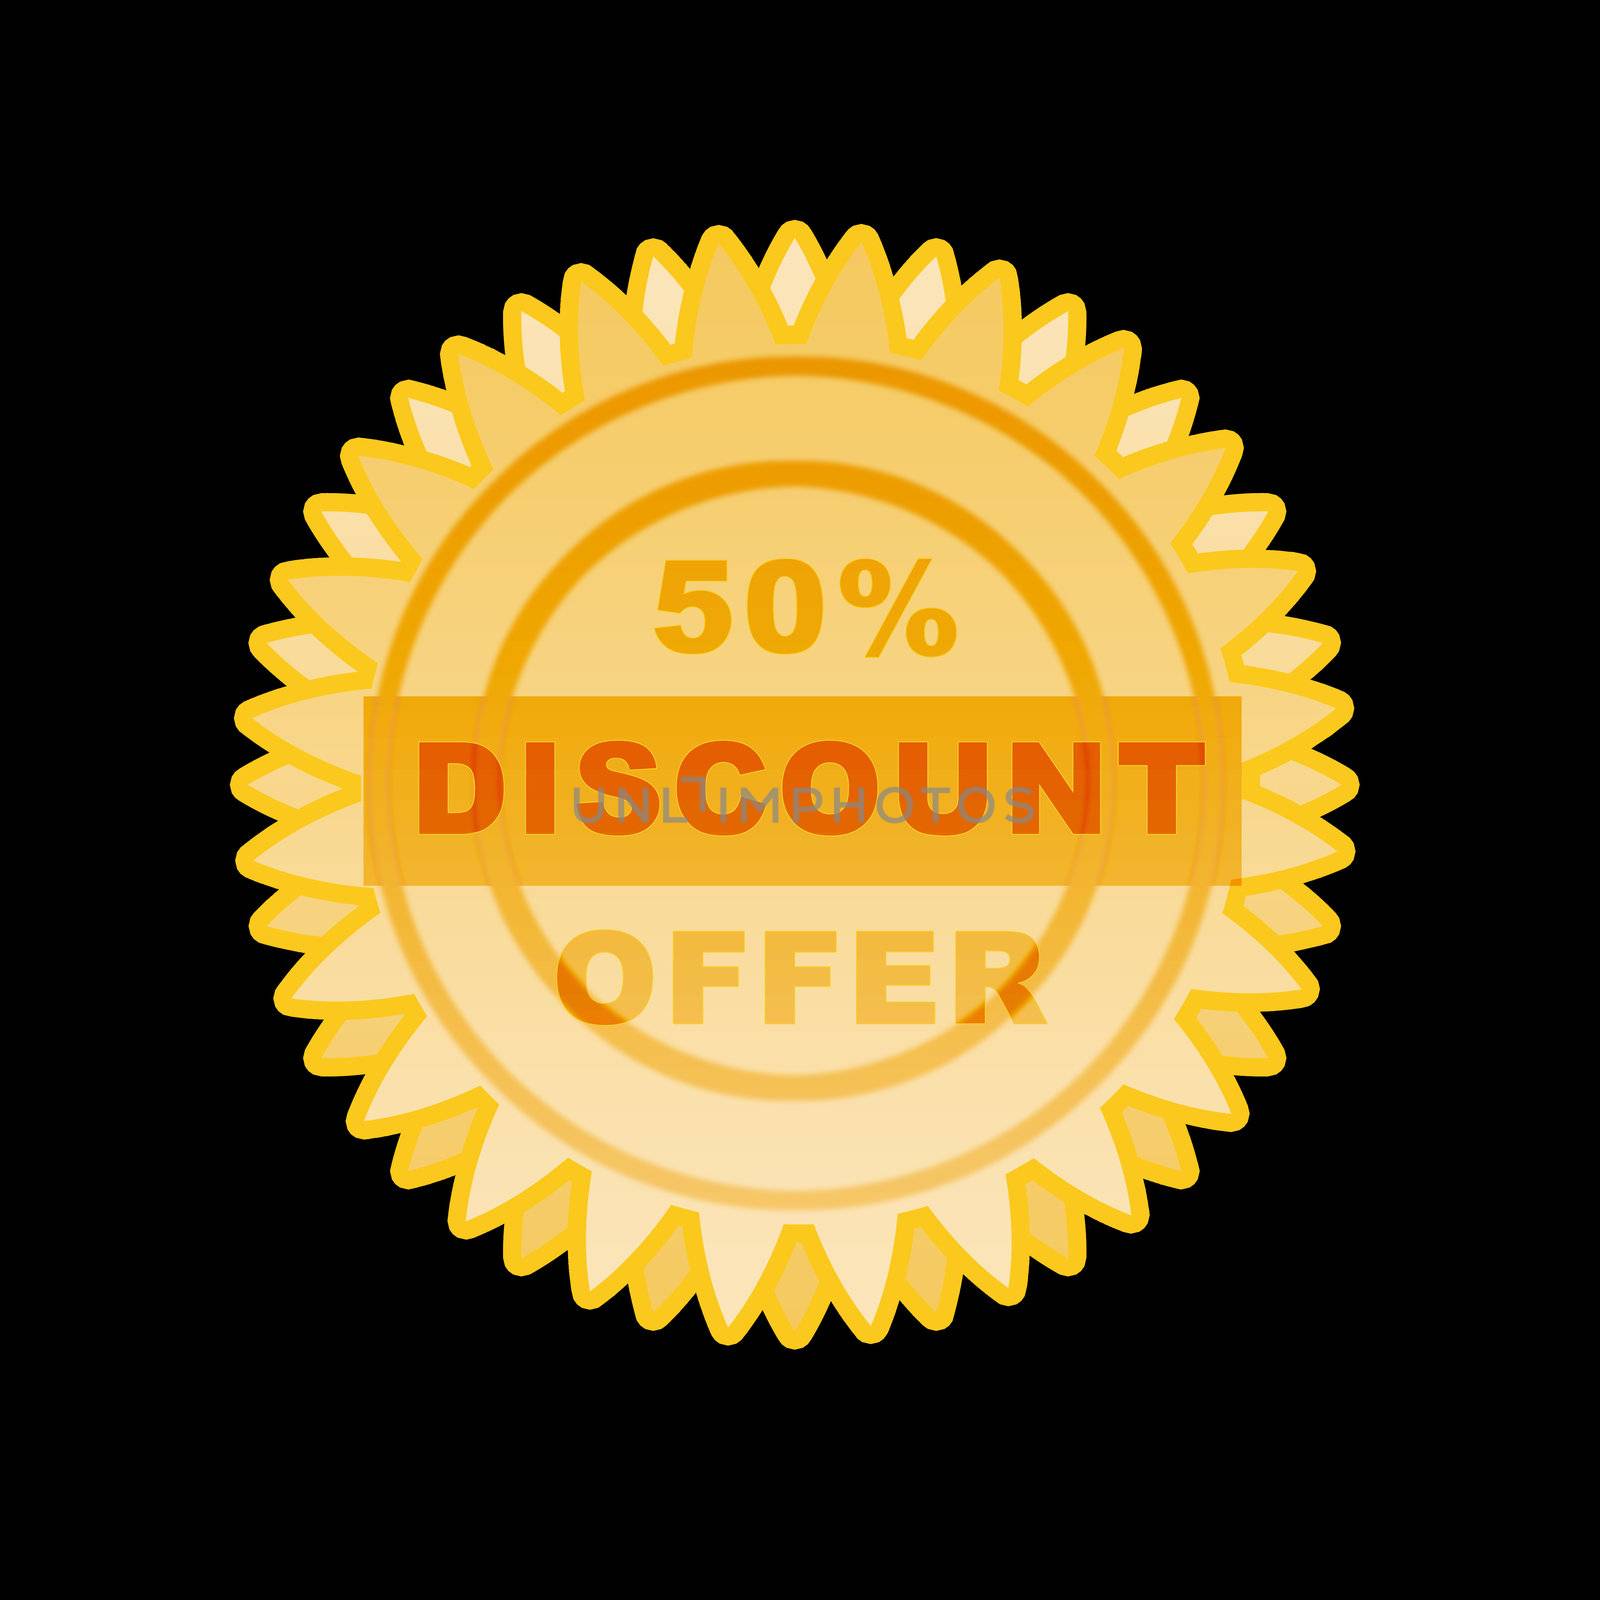 Gold seal 50% discount offer- illustration high resolution and digital.